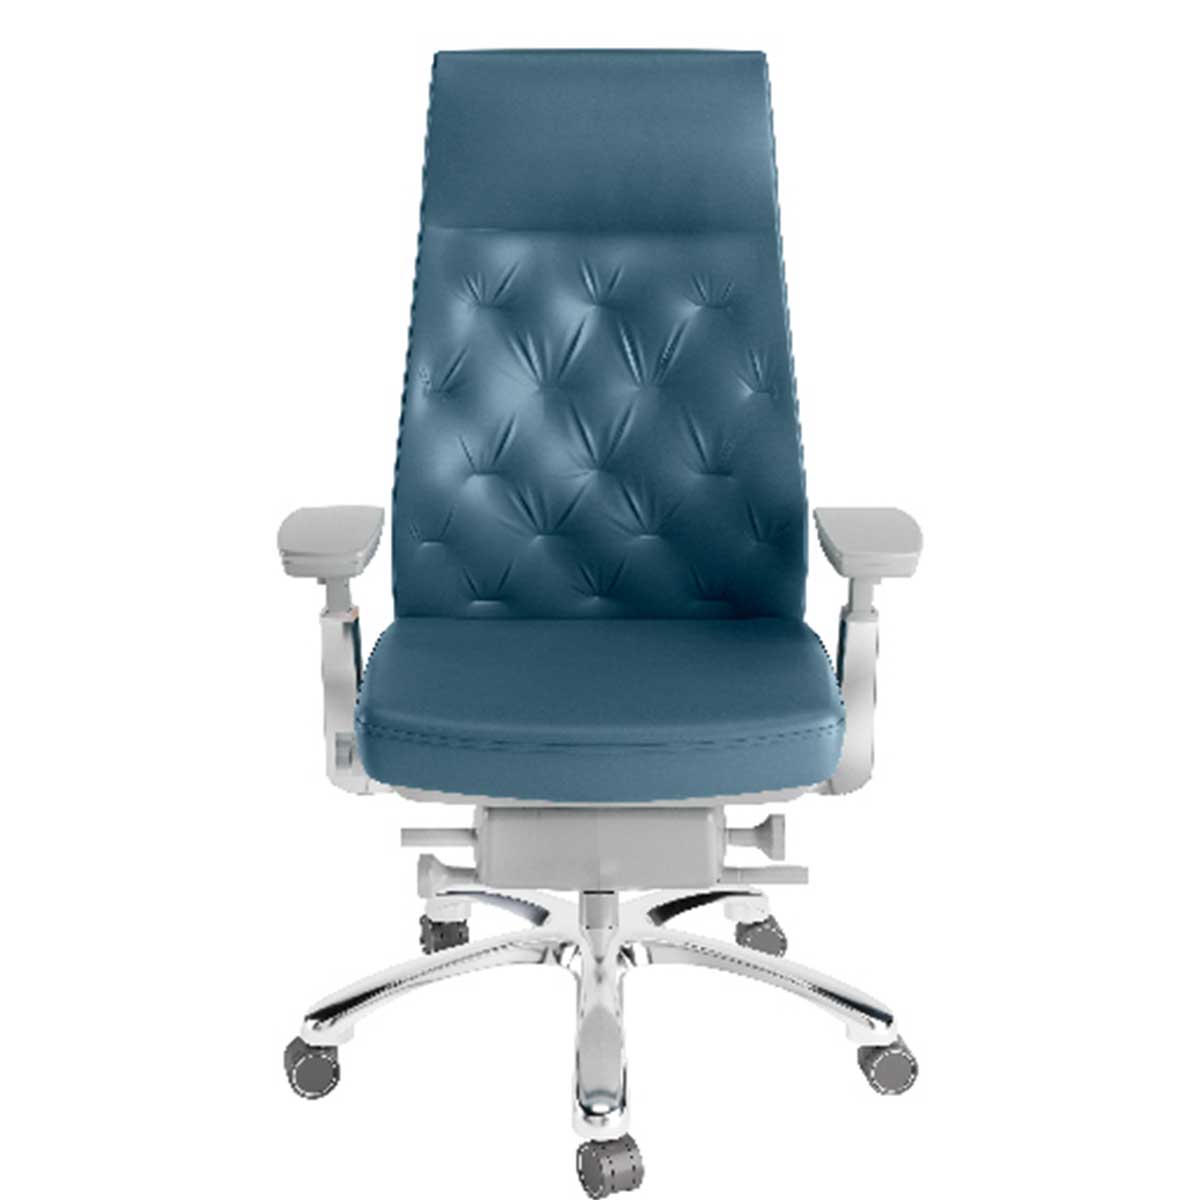 Boss Chair Manufacturers, Suppliers in Faridabad